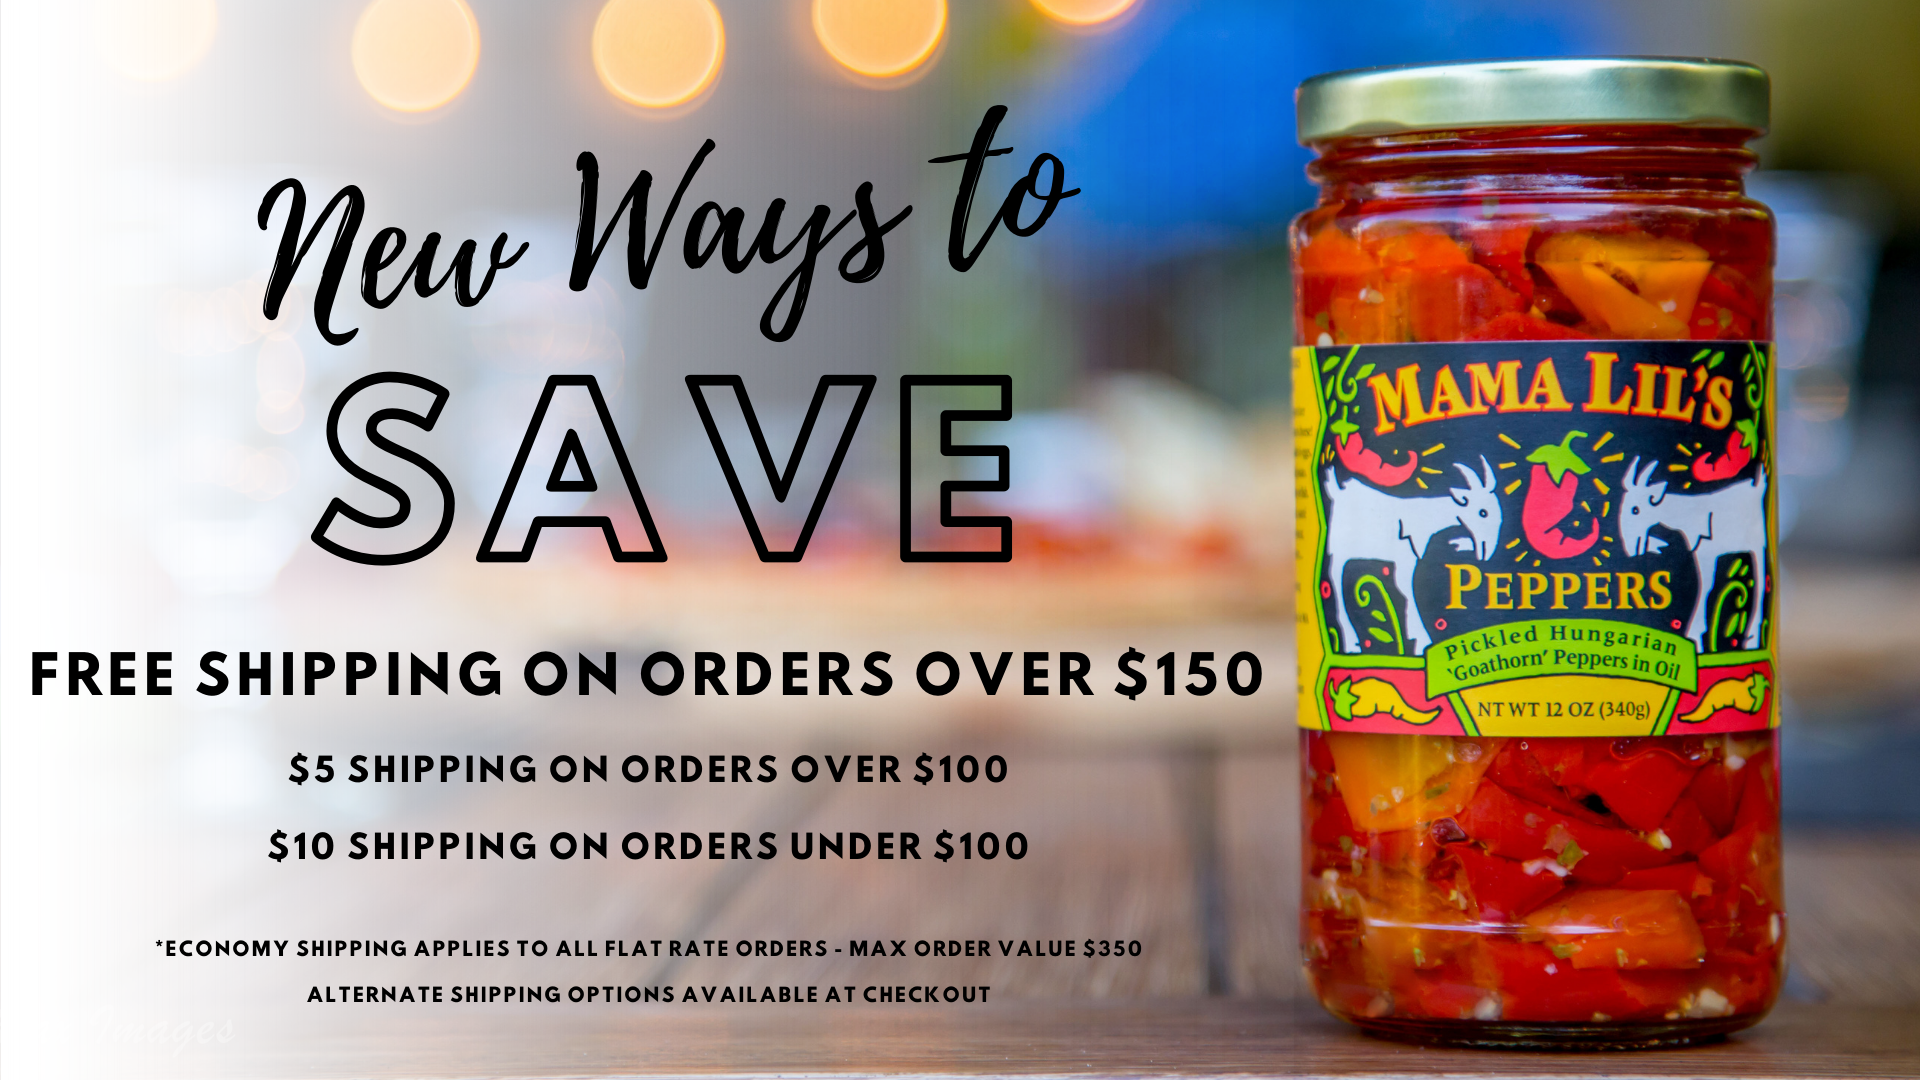 Mama Lil's peppers new ways to save on shipping